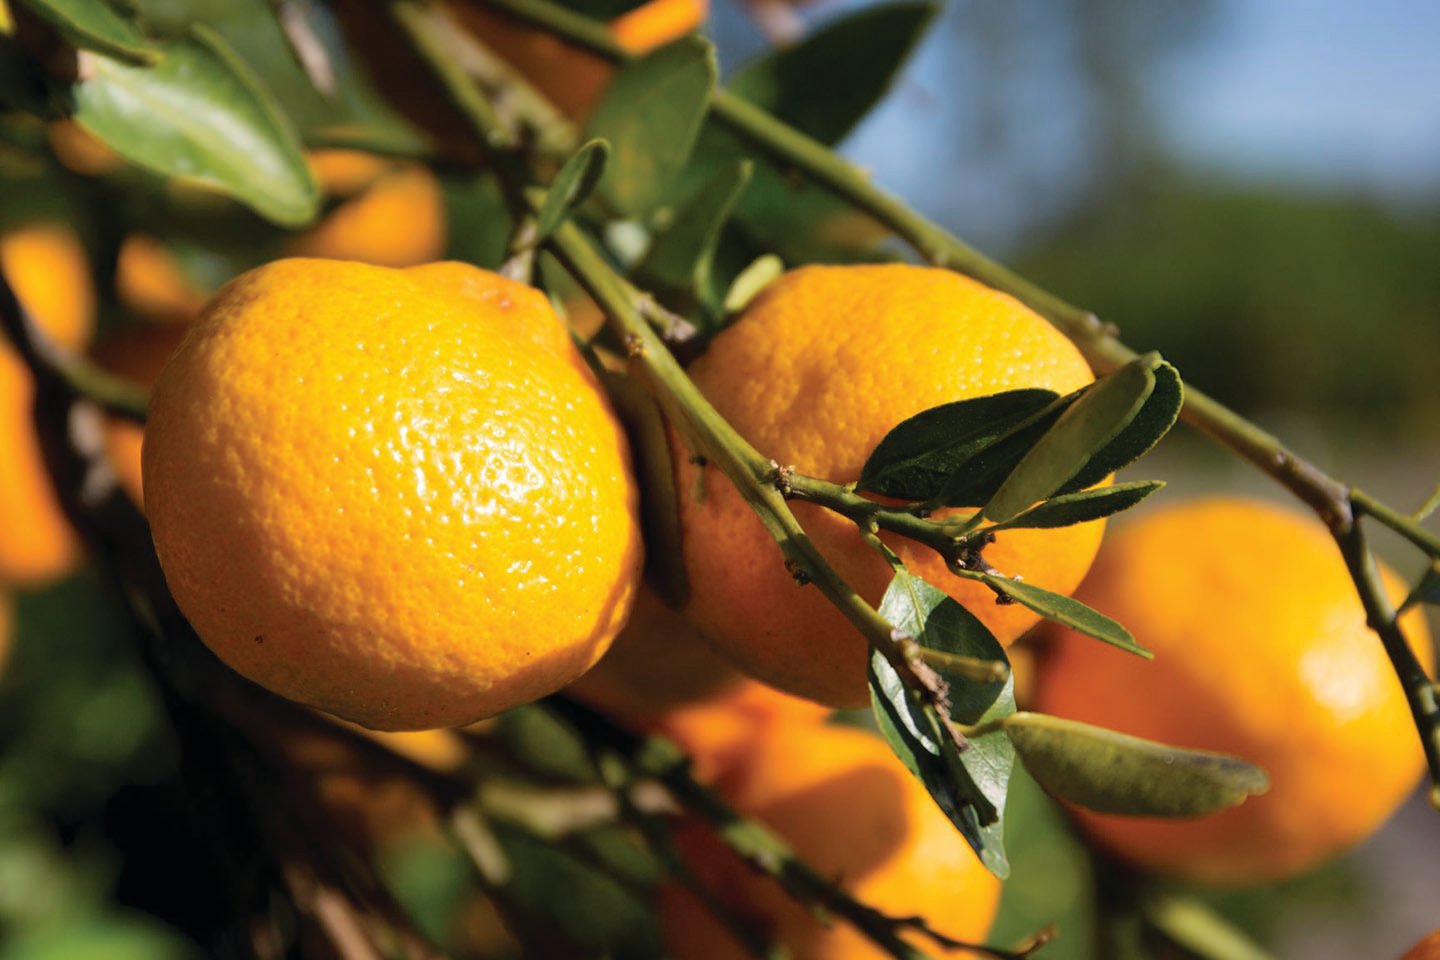 Three teams of scientists from UF’s Institute of Food and Agricultural Sciences received nearly $4.5 million in U.S. Department of Agriculture funds to study new ways to manage the invasive insect causing millions of dollars’ worth of damage to Florida’s citrus crops.